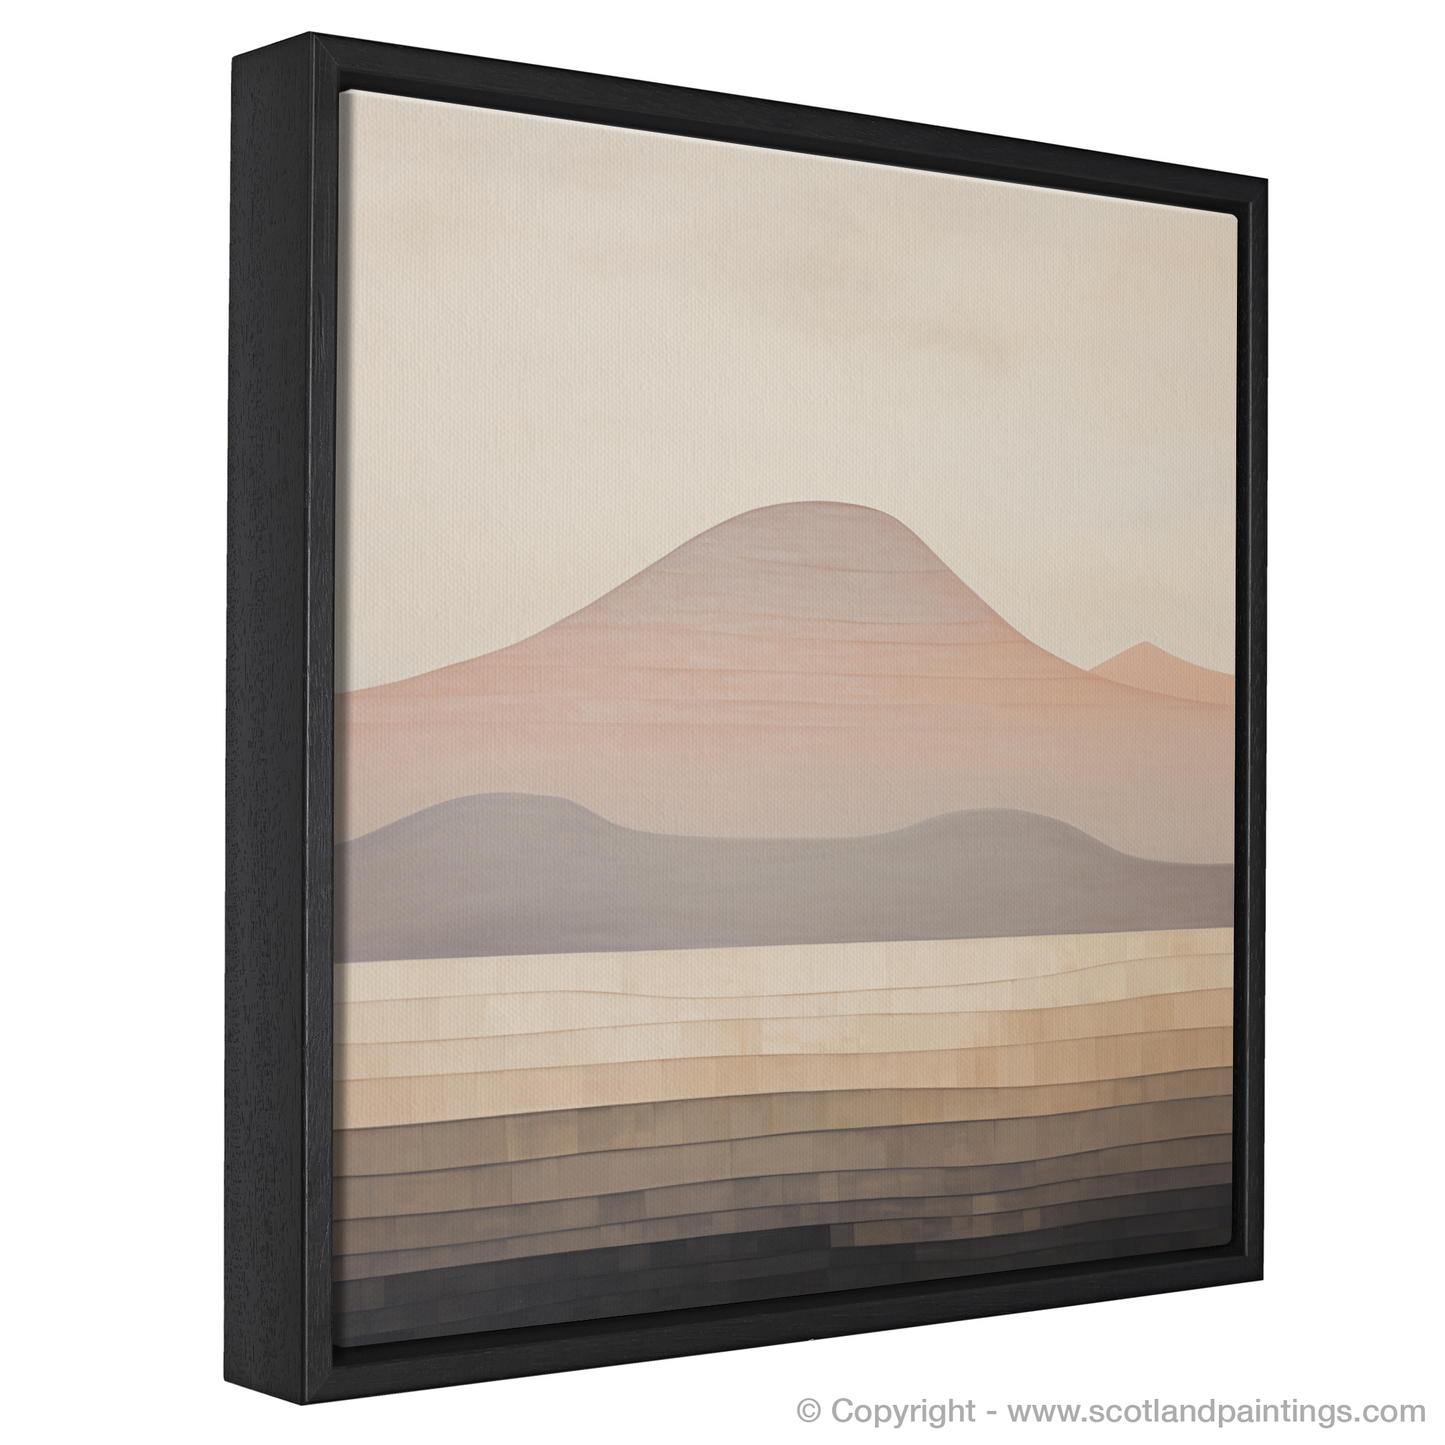 Painting and Art Print of Meall Greigh entitled "Abstract Essence of Meall Greigh".